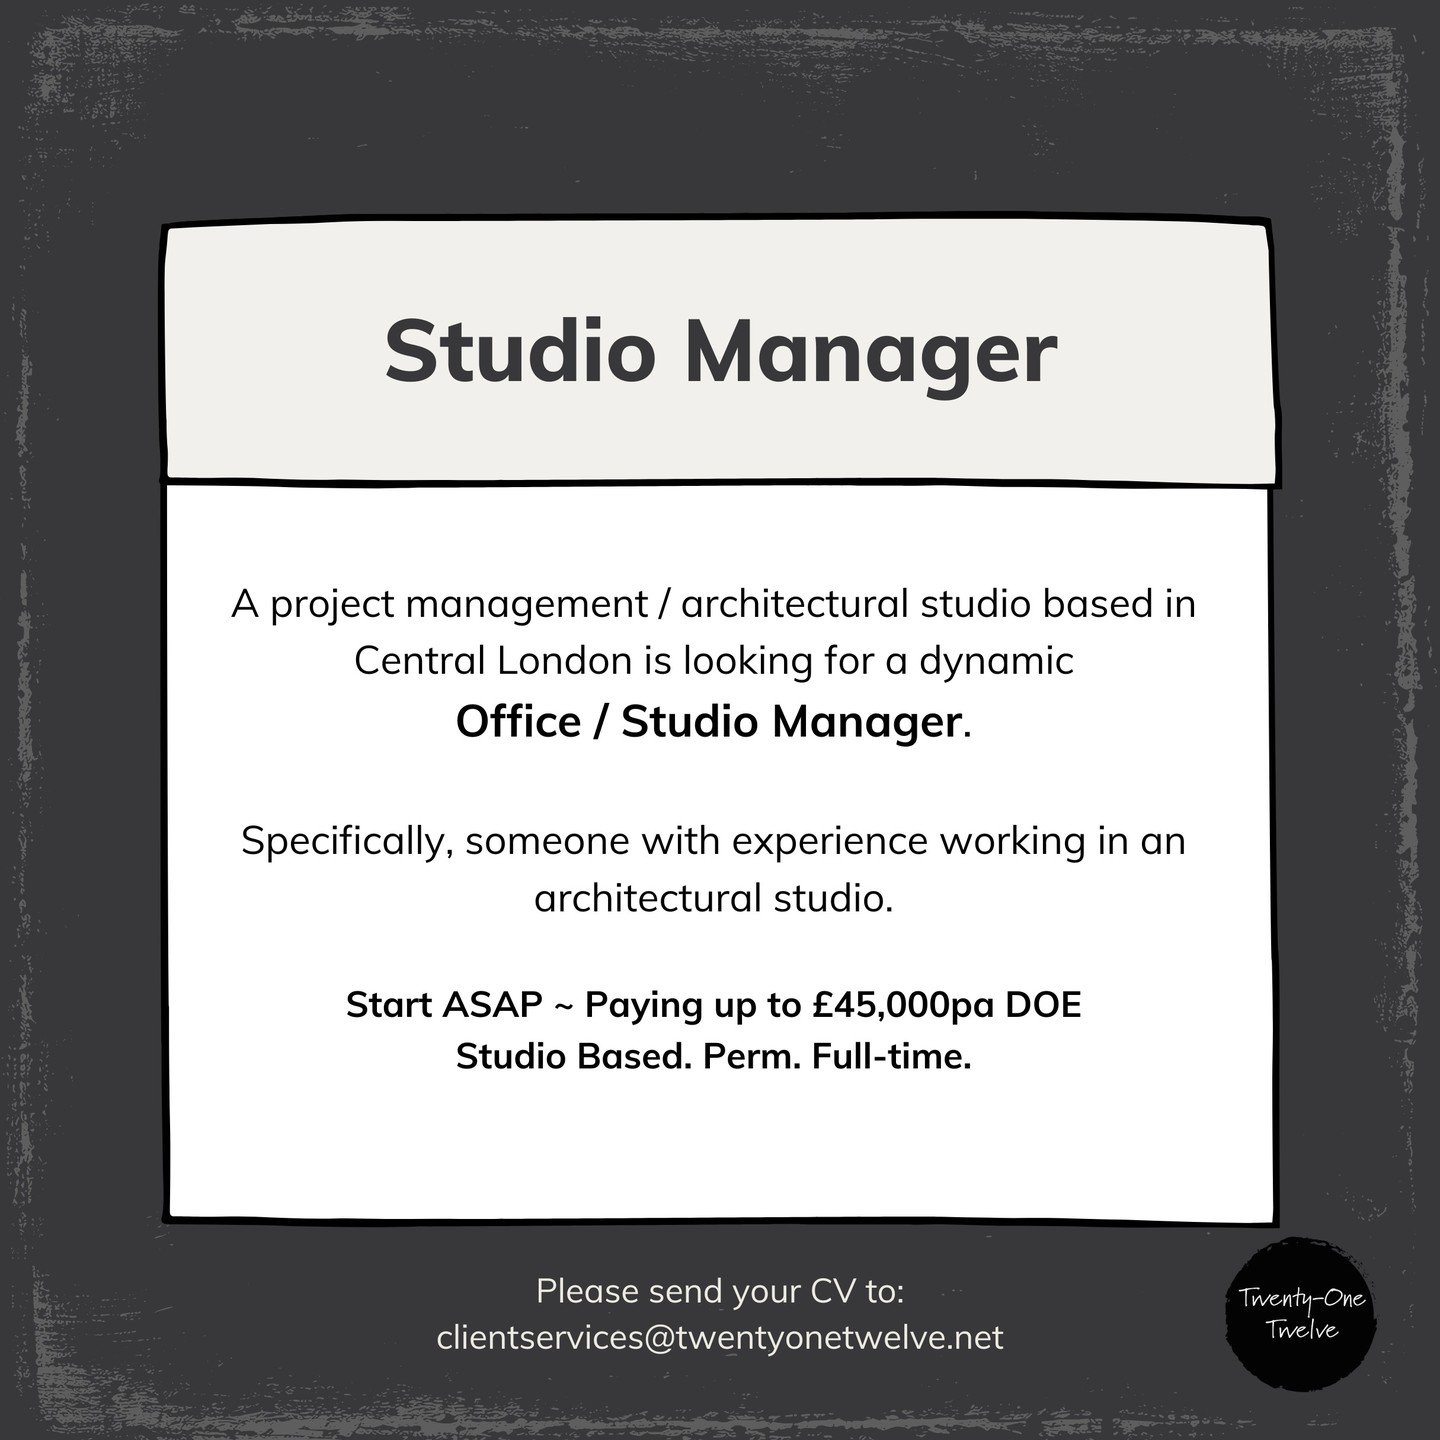 An exciting opportunity has become available with a Project Management / Architectural Studio in Central London who are looking for a Office Manager. Prior experience in an architectural practice is a big plus!!! Please send CVs to clientsevices@twen